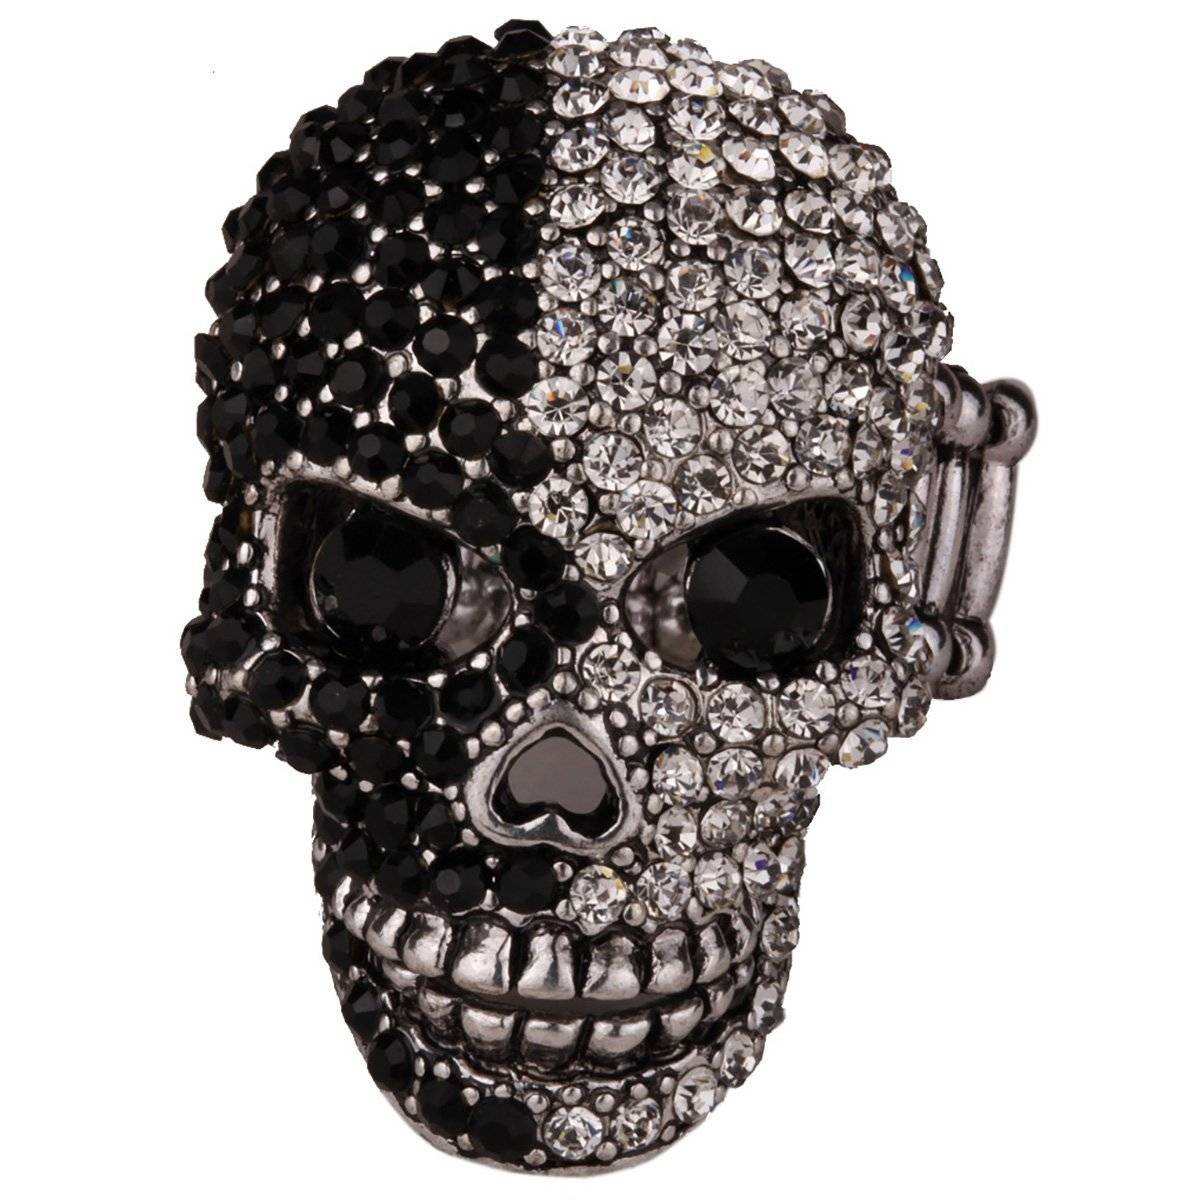 Skull Stretch Ring Women Girls Scarf Clasp/Ring Bling Gothic Jewelry – 8 Color Choices Gothtopia https://gothtopia.com